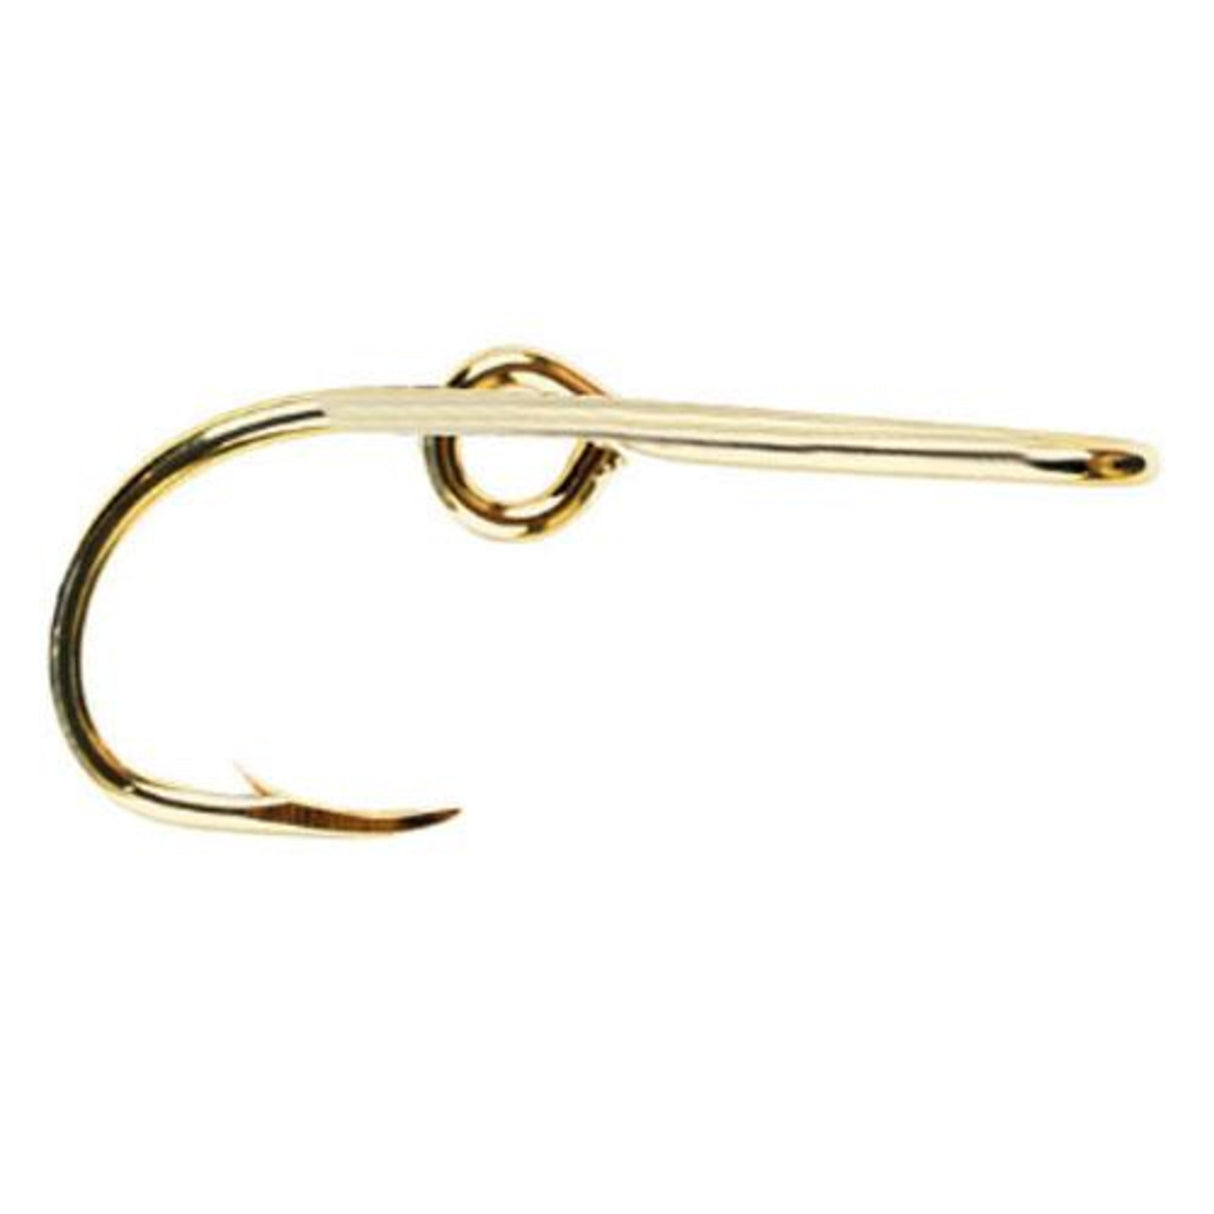 EAGLE CLAW HAT HOOK/TIE CLASP